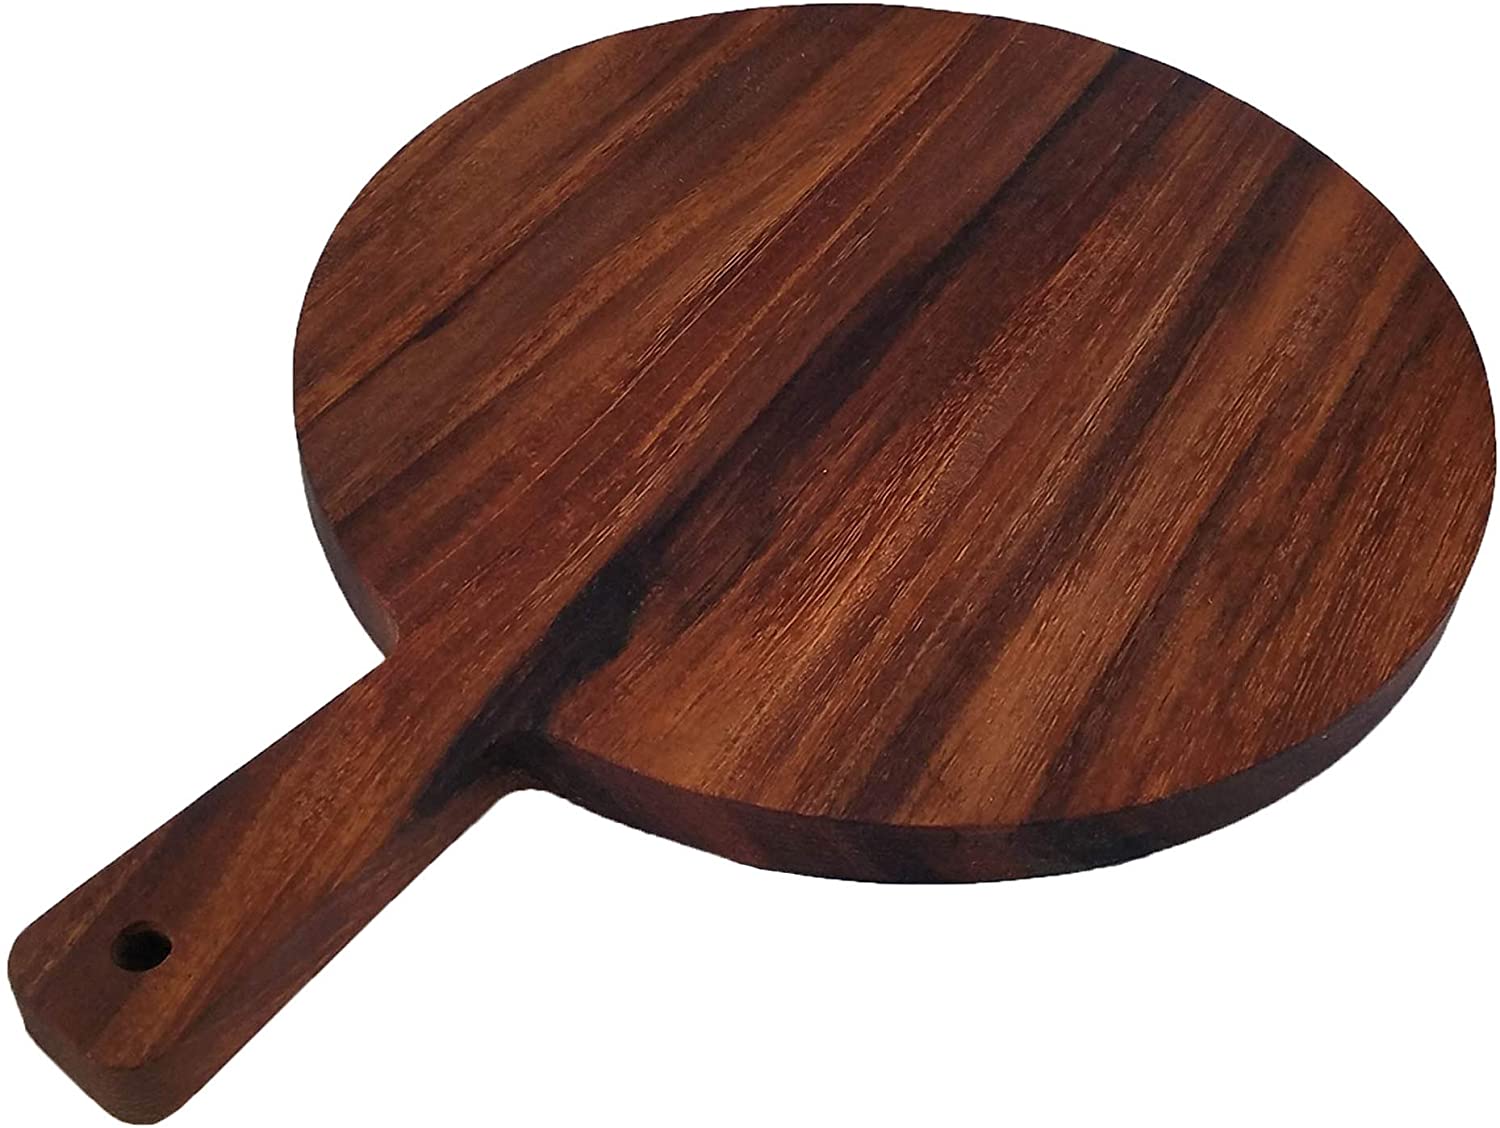 PAROTA WOOD PRODUCTS / Round Parota Wood Serving/Cutting Board with Handle